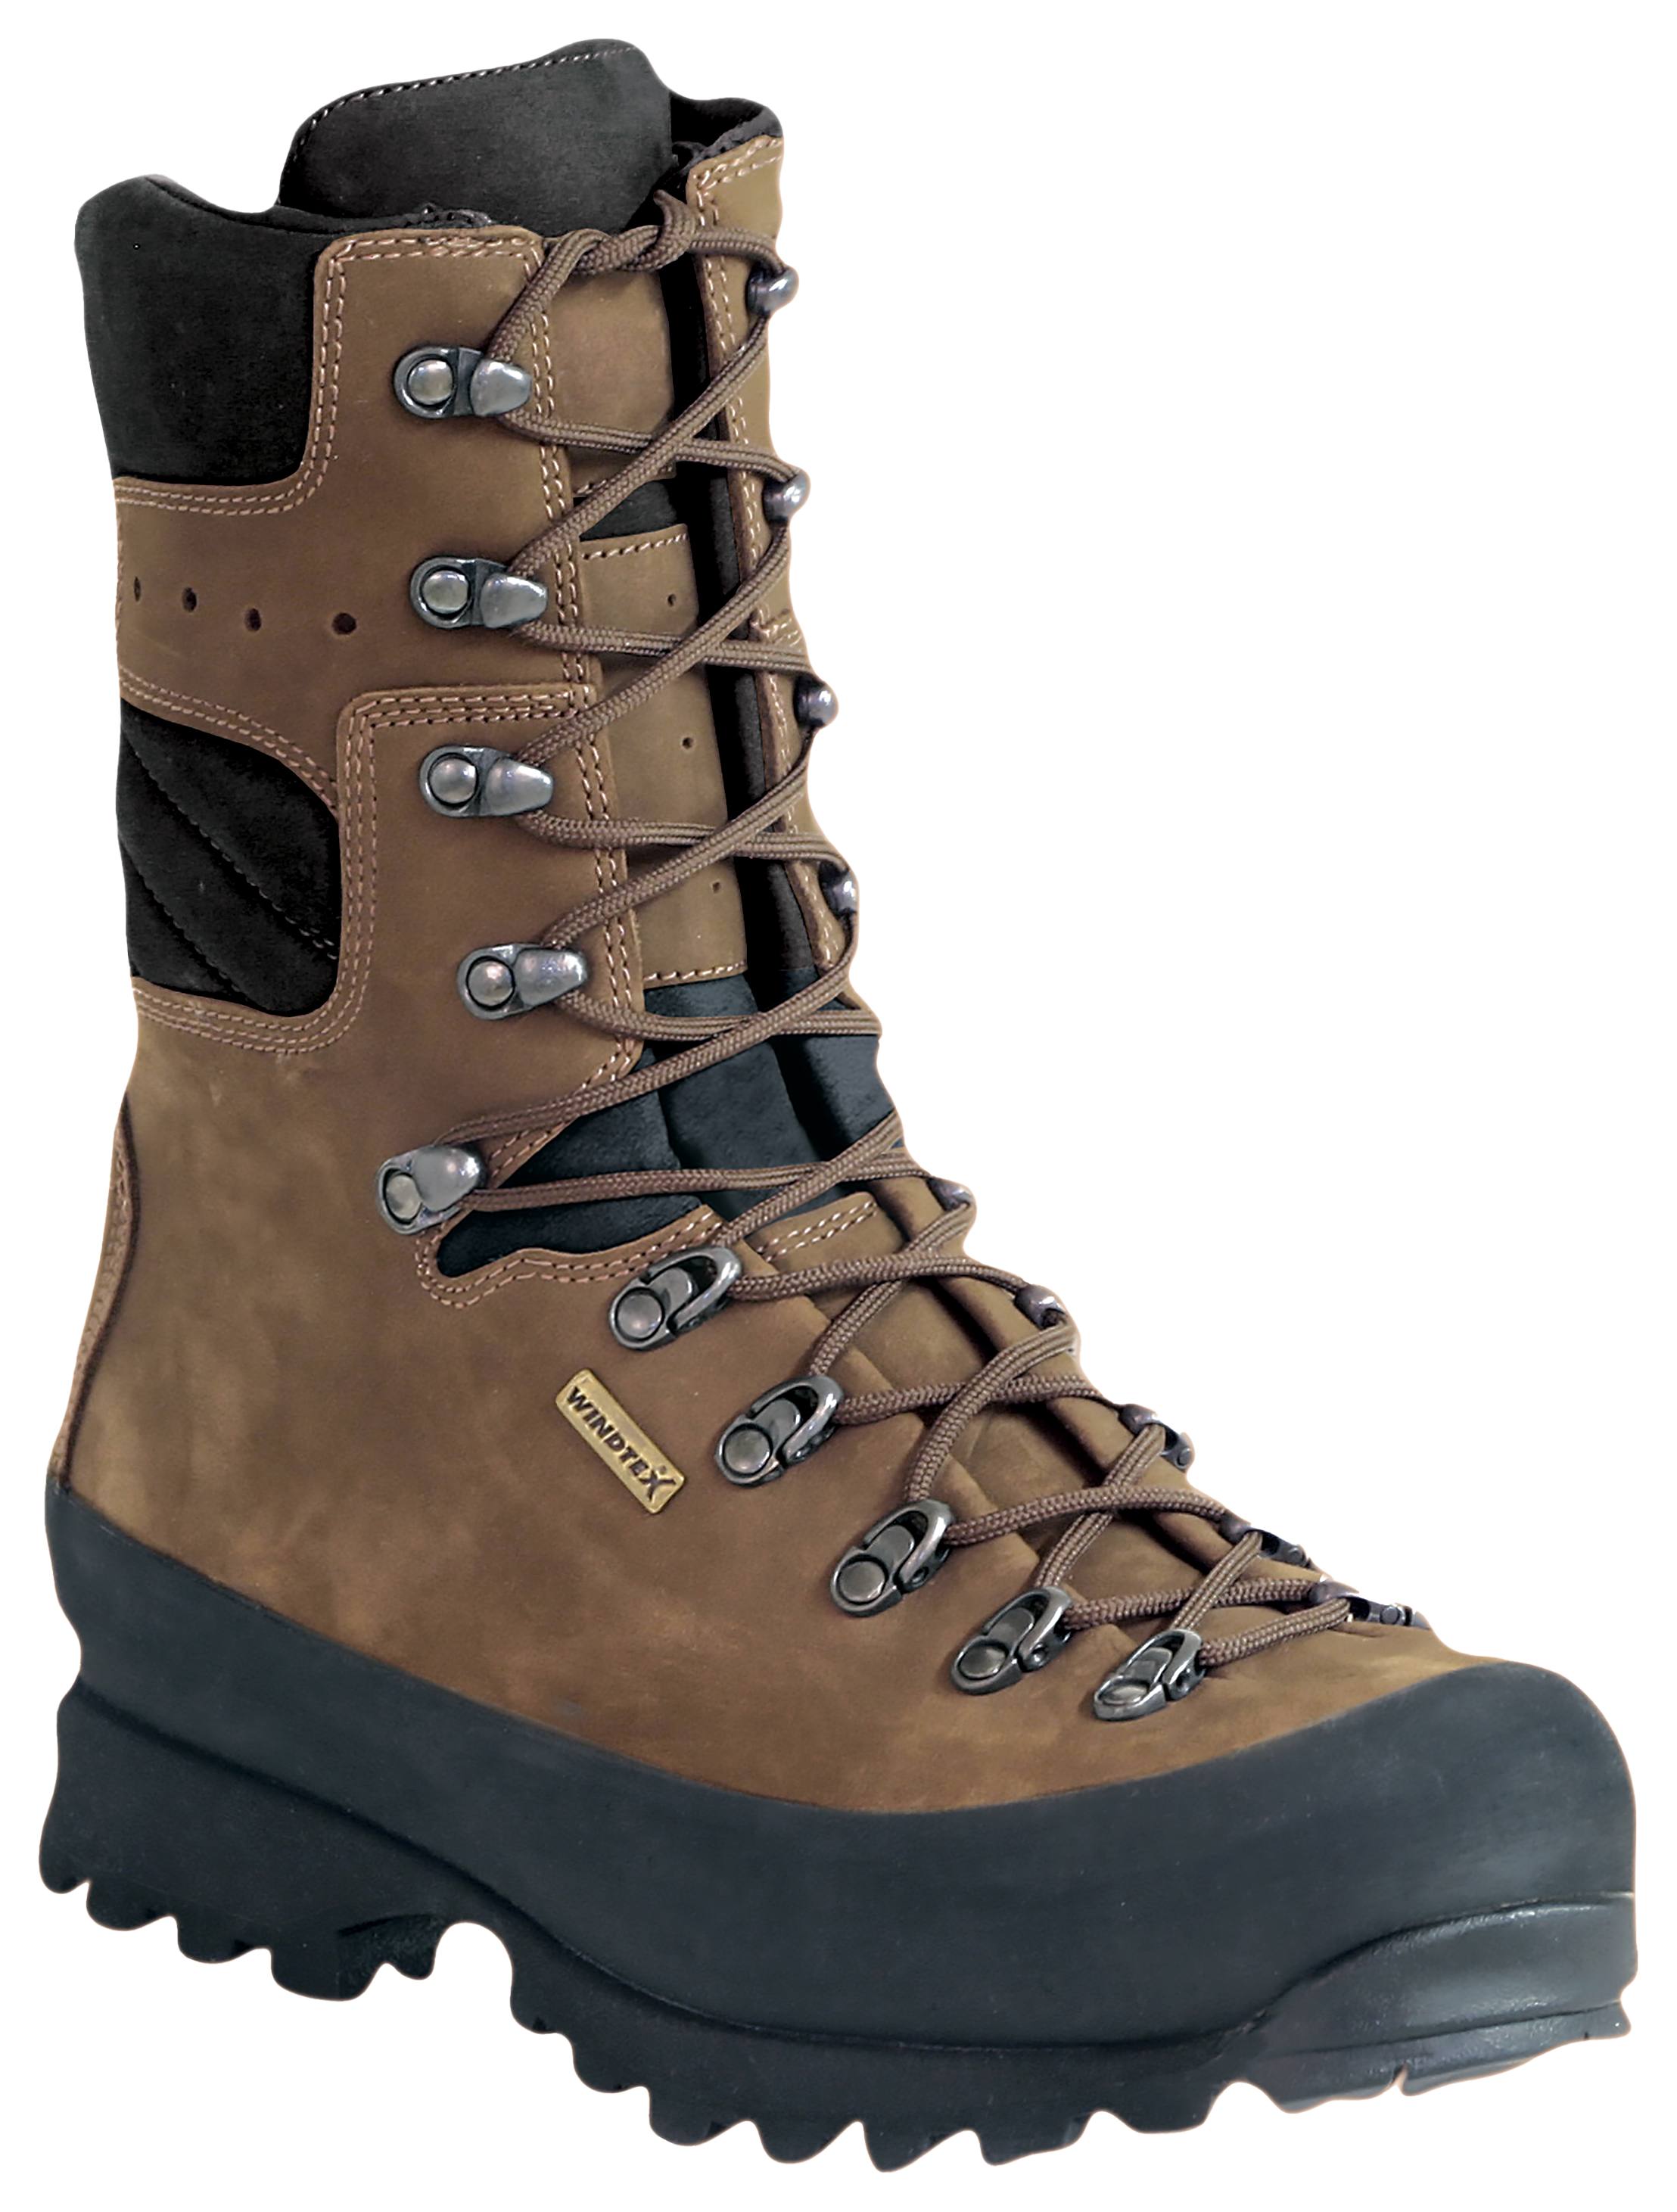 Kenetrek Mountain Extreme 1000 Insulated Waterproof Hunting Boots for Men - Brown - 8 5M